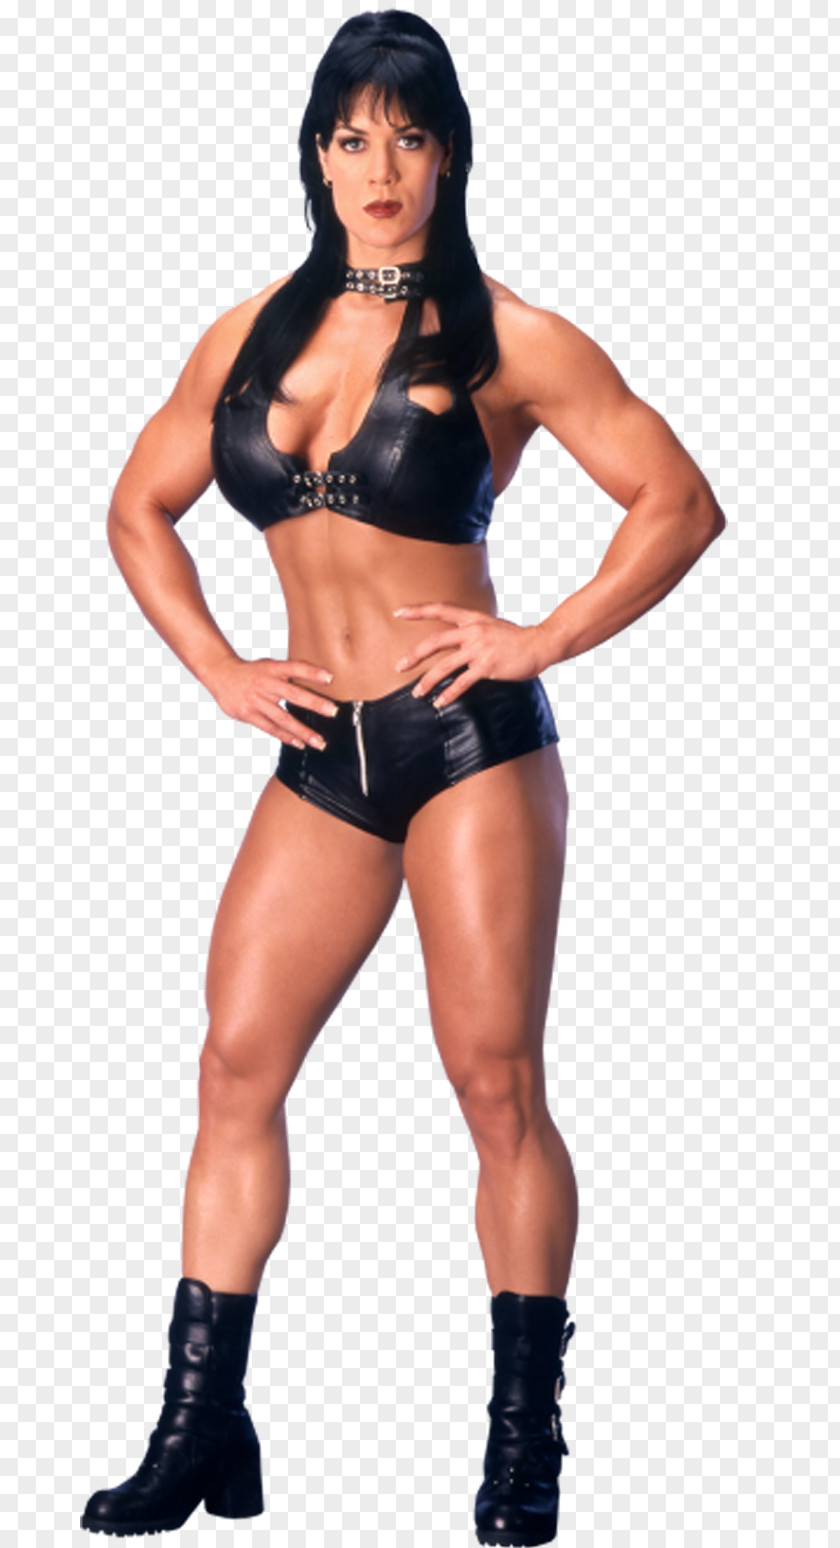 Chyna WWE Superstars Professional Wrestler Women In PNG in WWE, Wrestlers clipart PNG